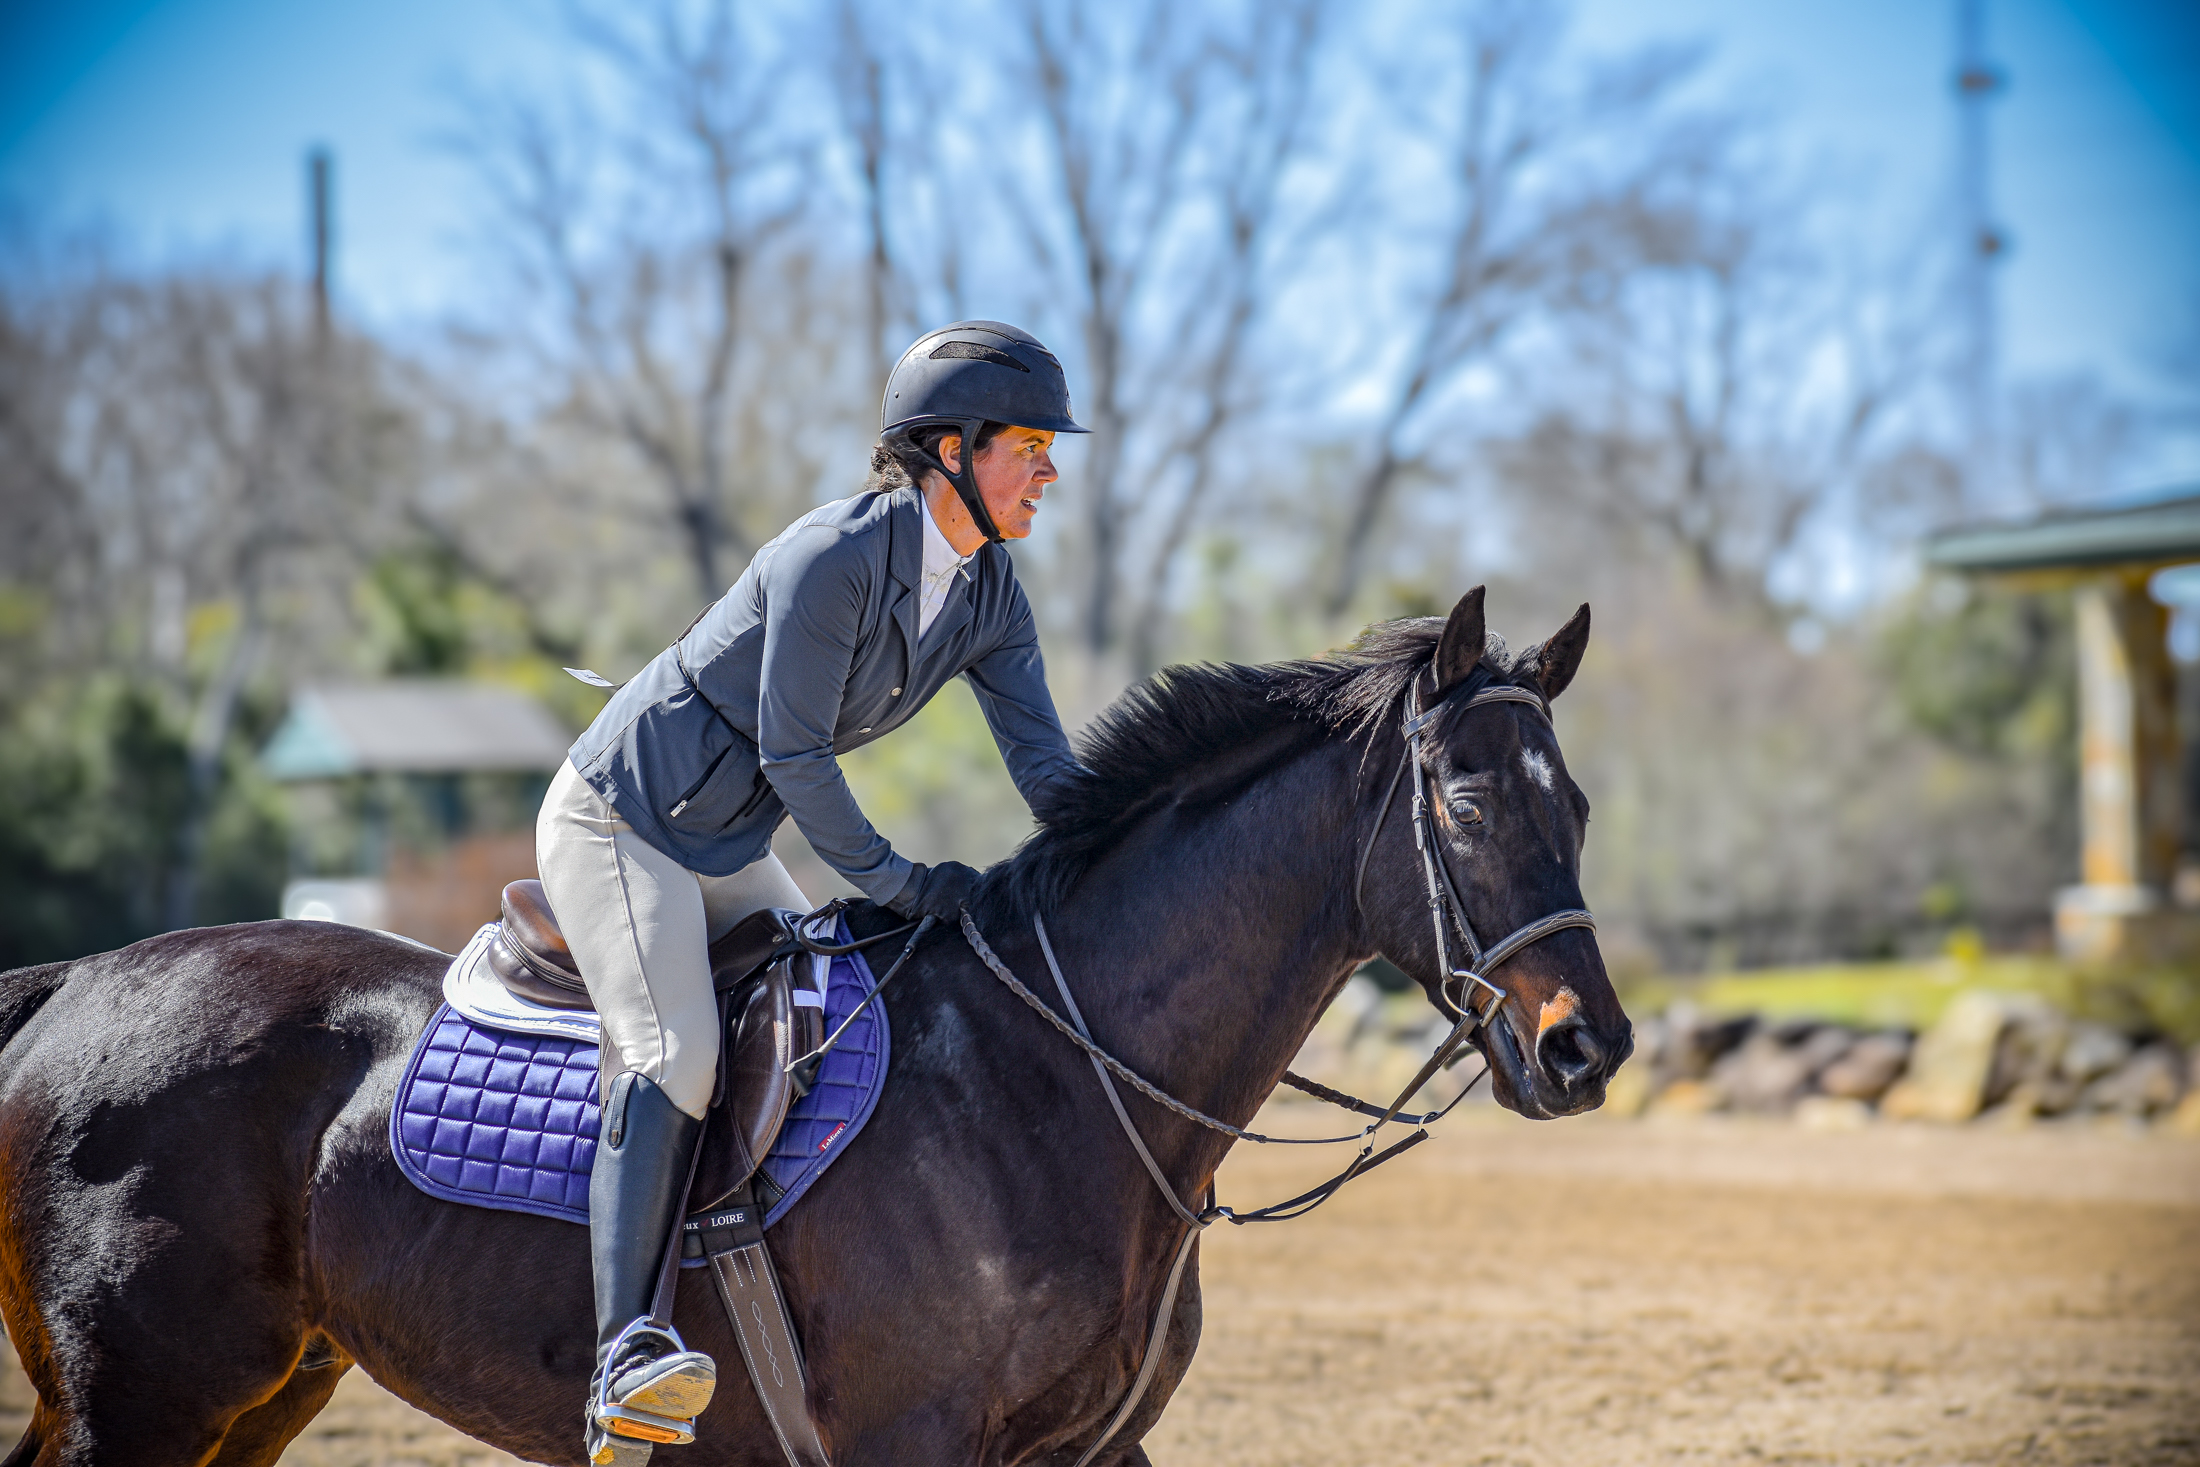 Cambi Lion: A Racehorse’s Journey to the Hunter Jumper World